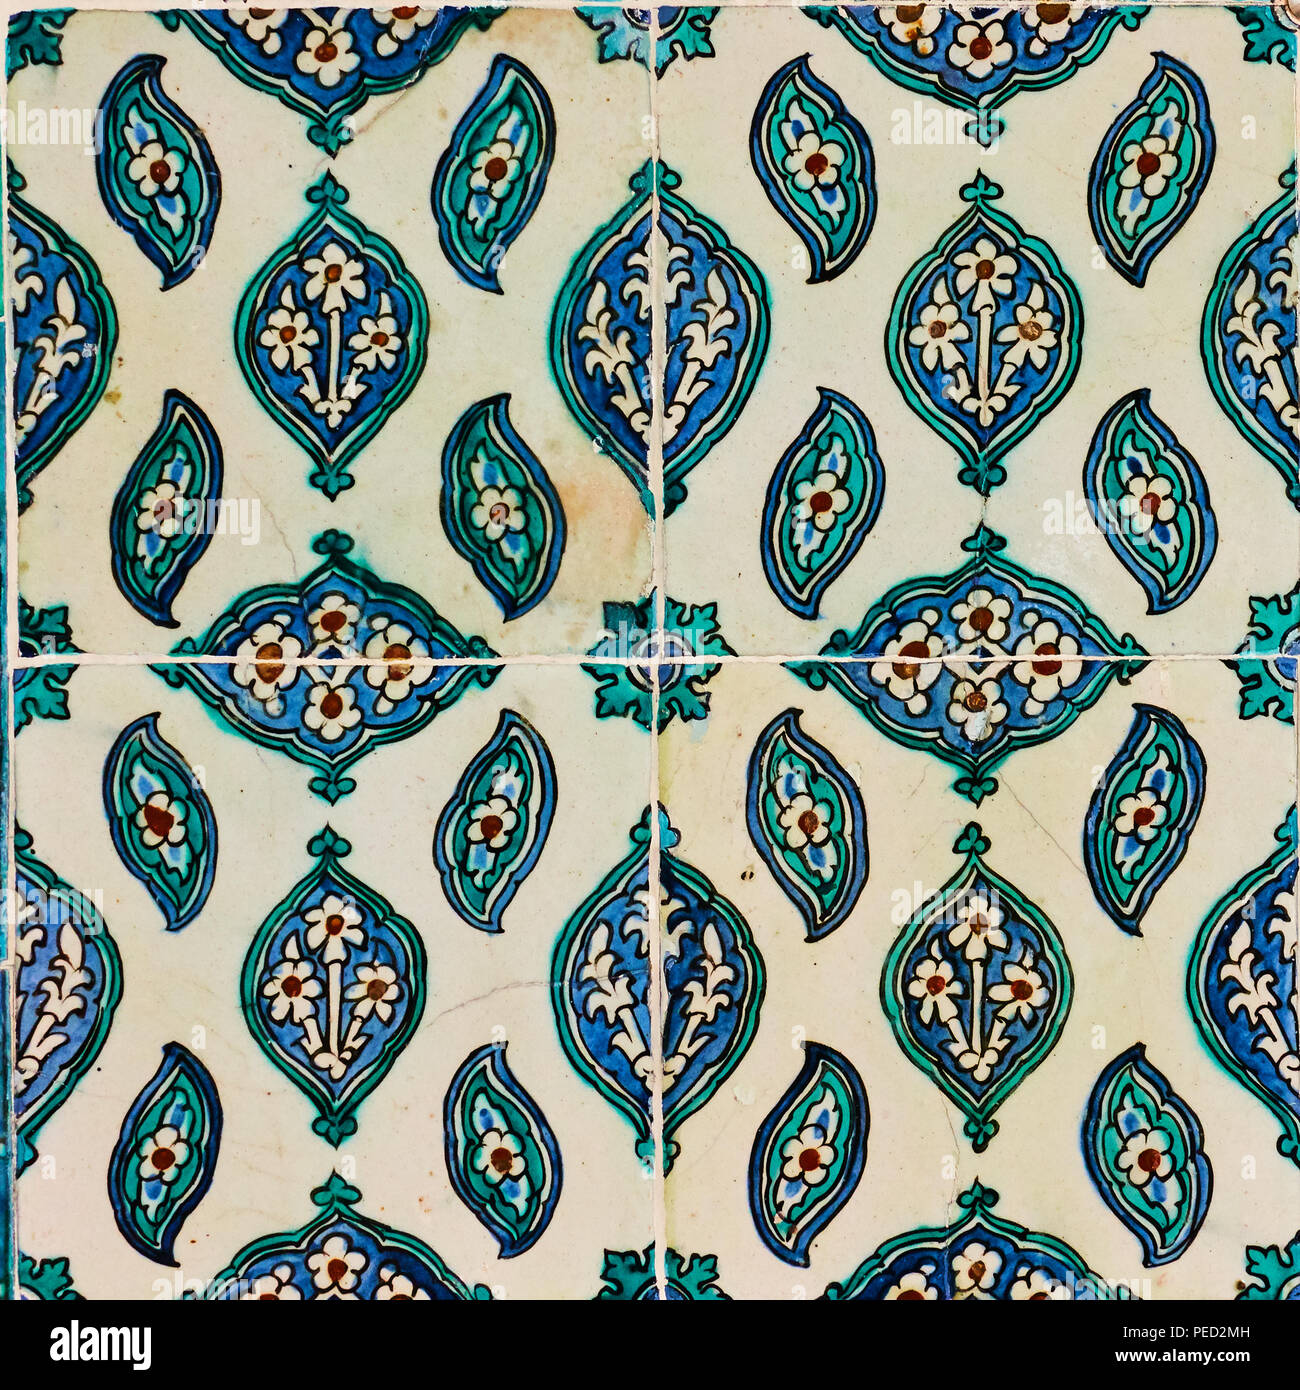 Istanbul, Turkey - July 16, 2018: Ancient turkish ceramic tiles with floral pattern Stock Photo